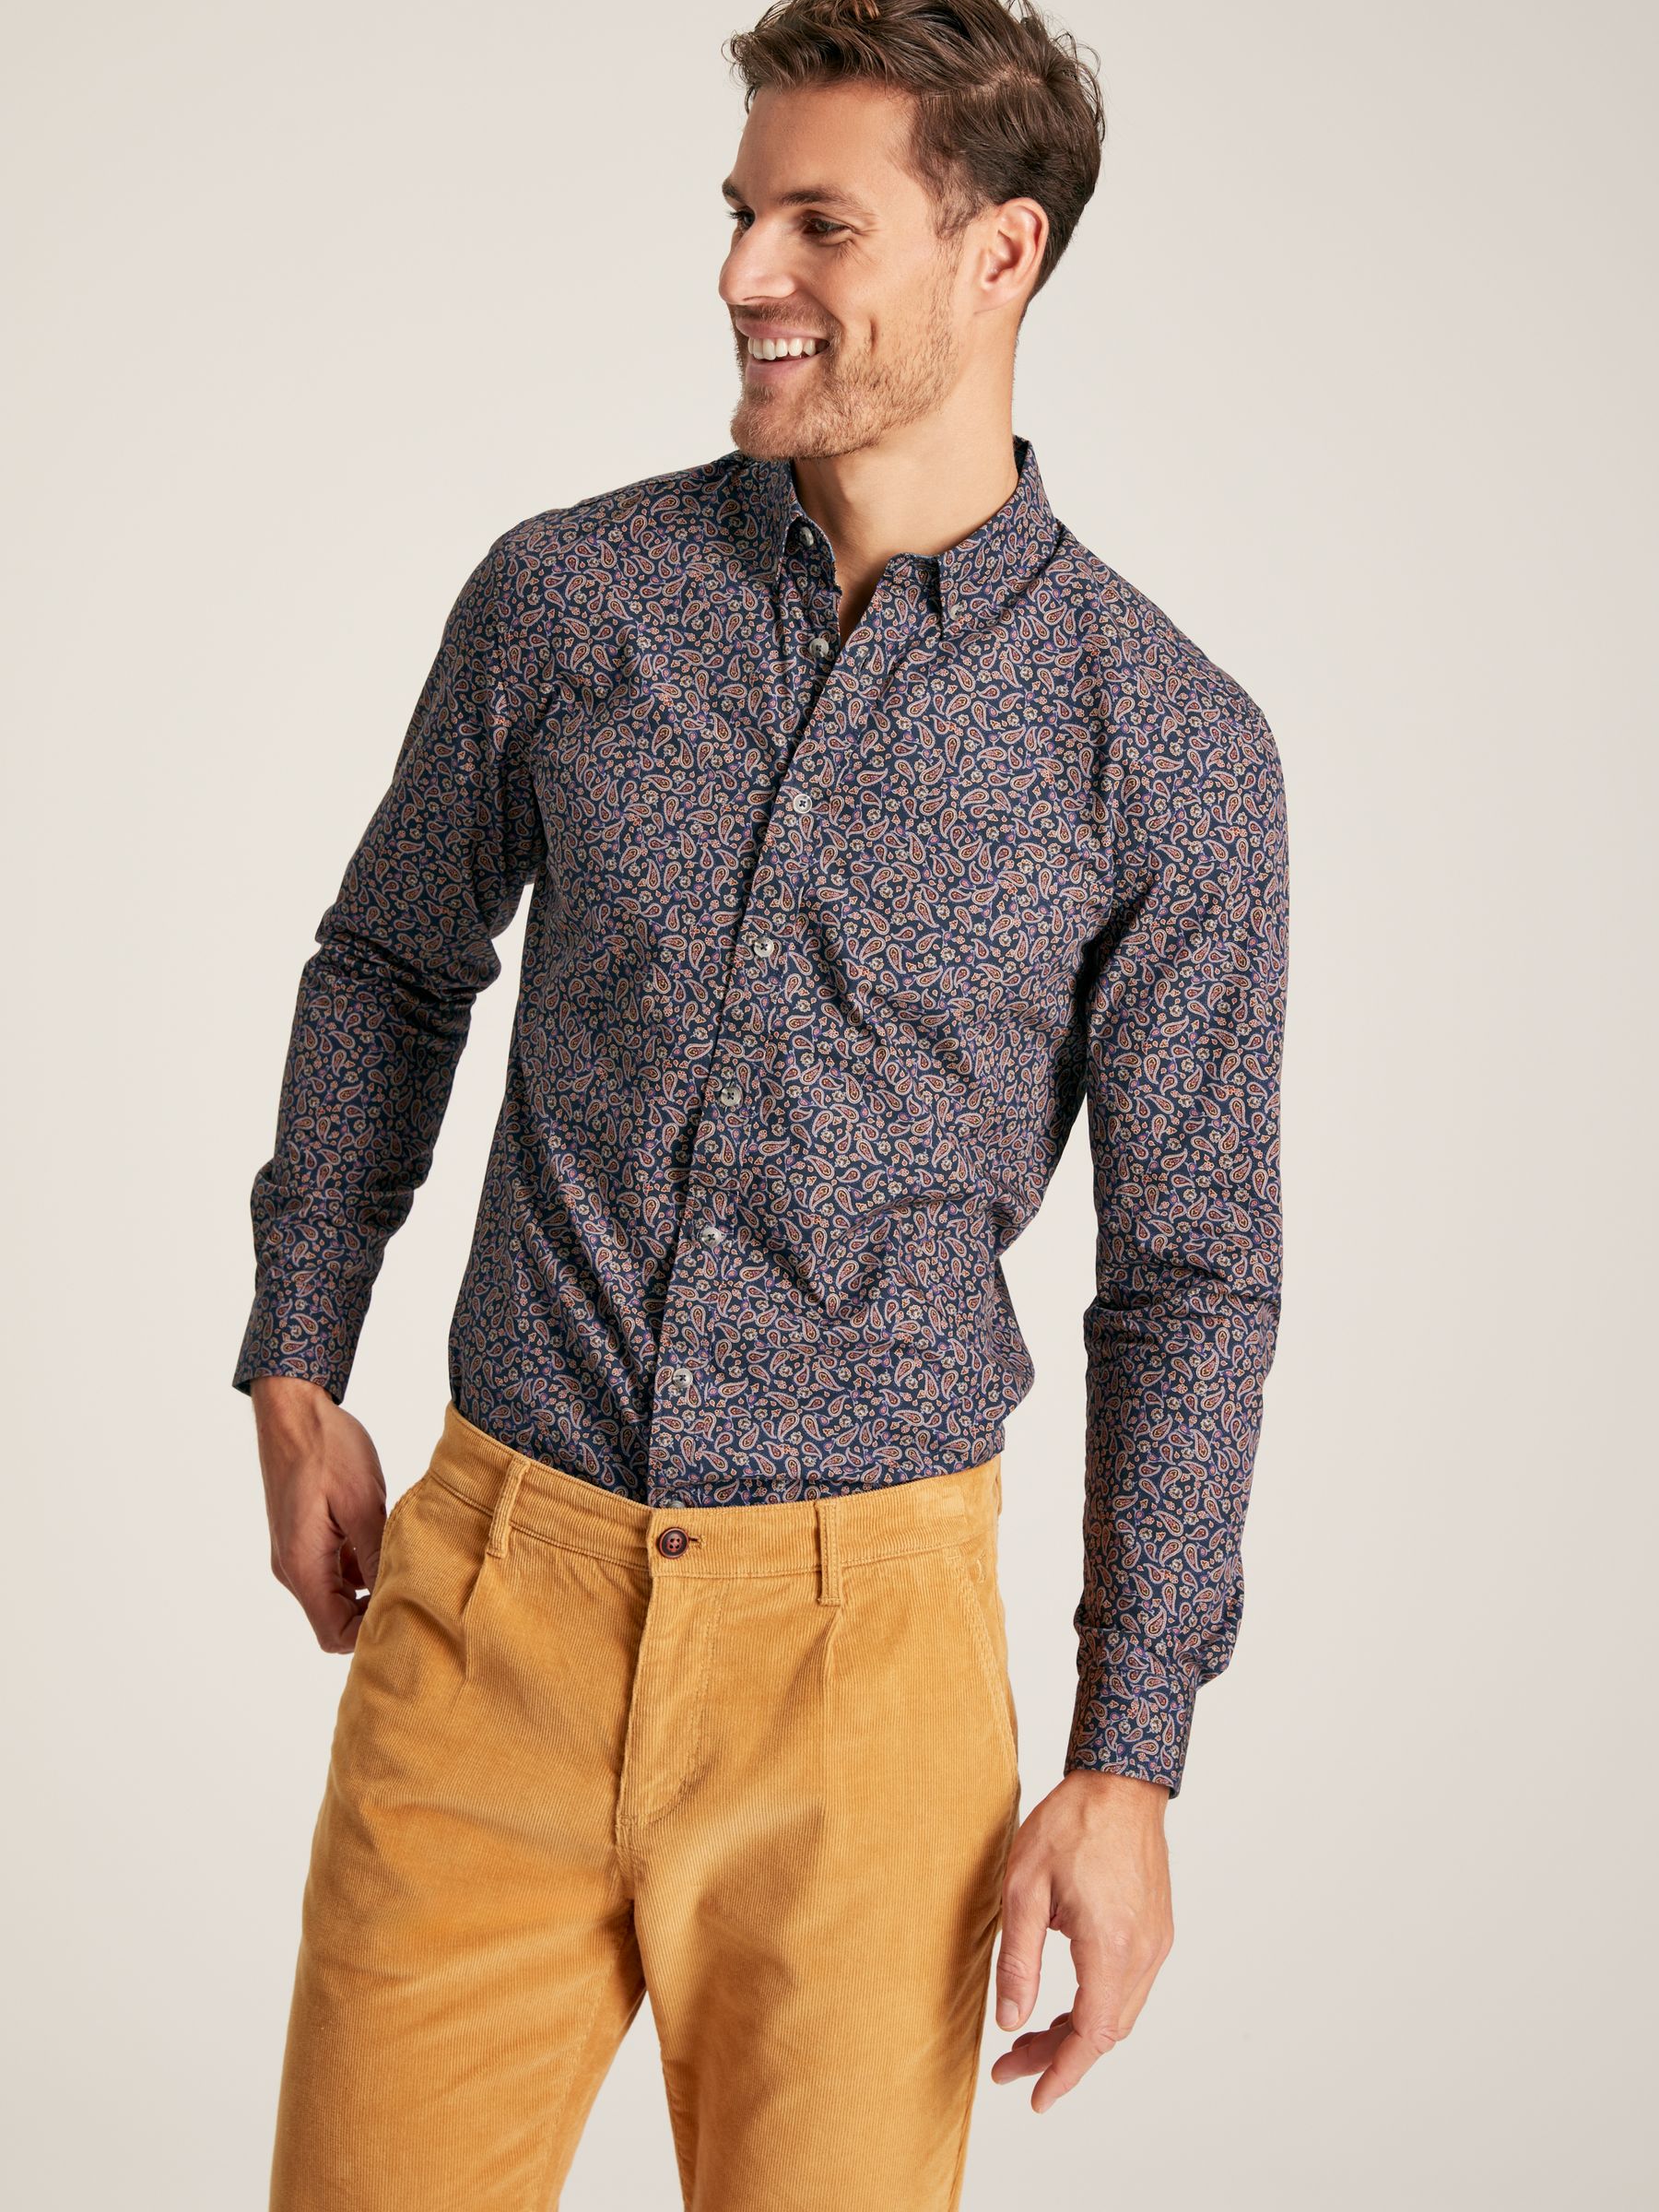 Buy Invitation Navy Paisley Cotton Shirt from the Joules online shop